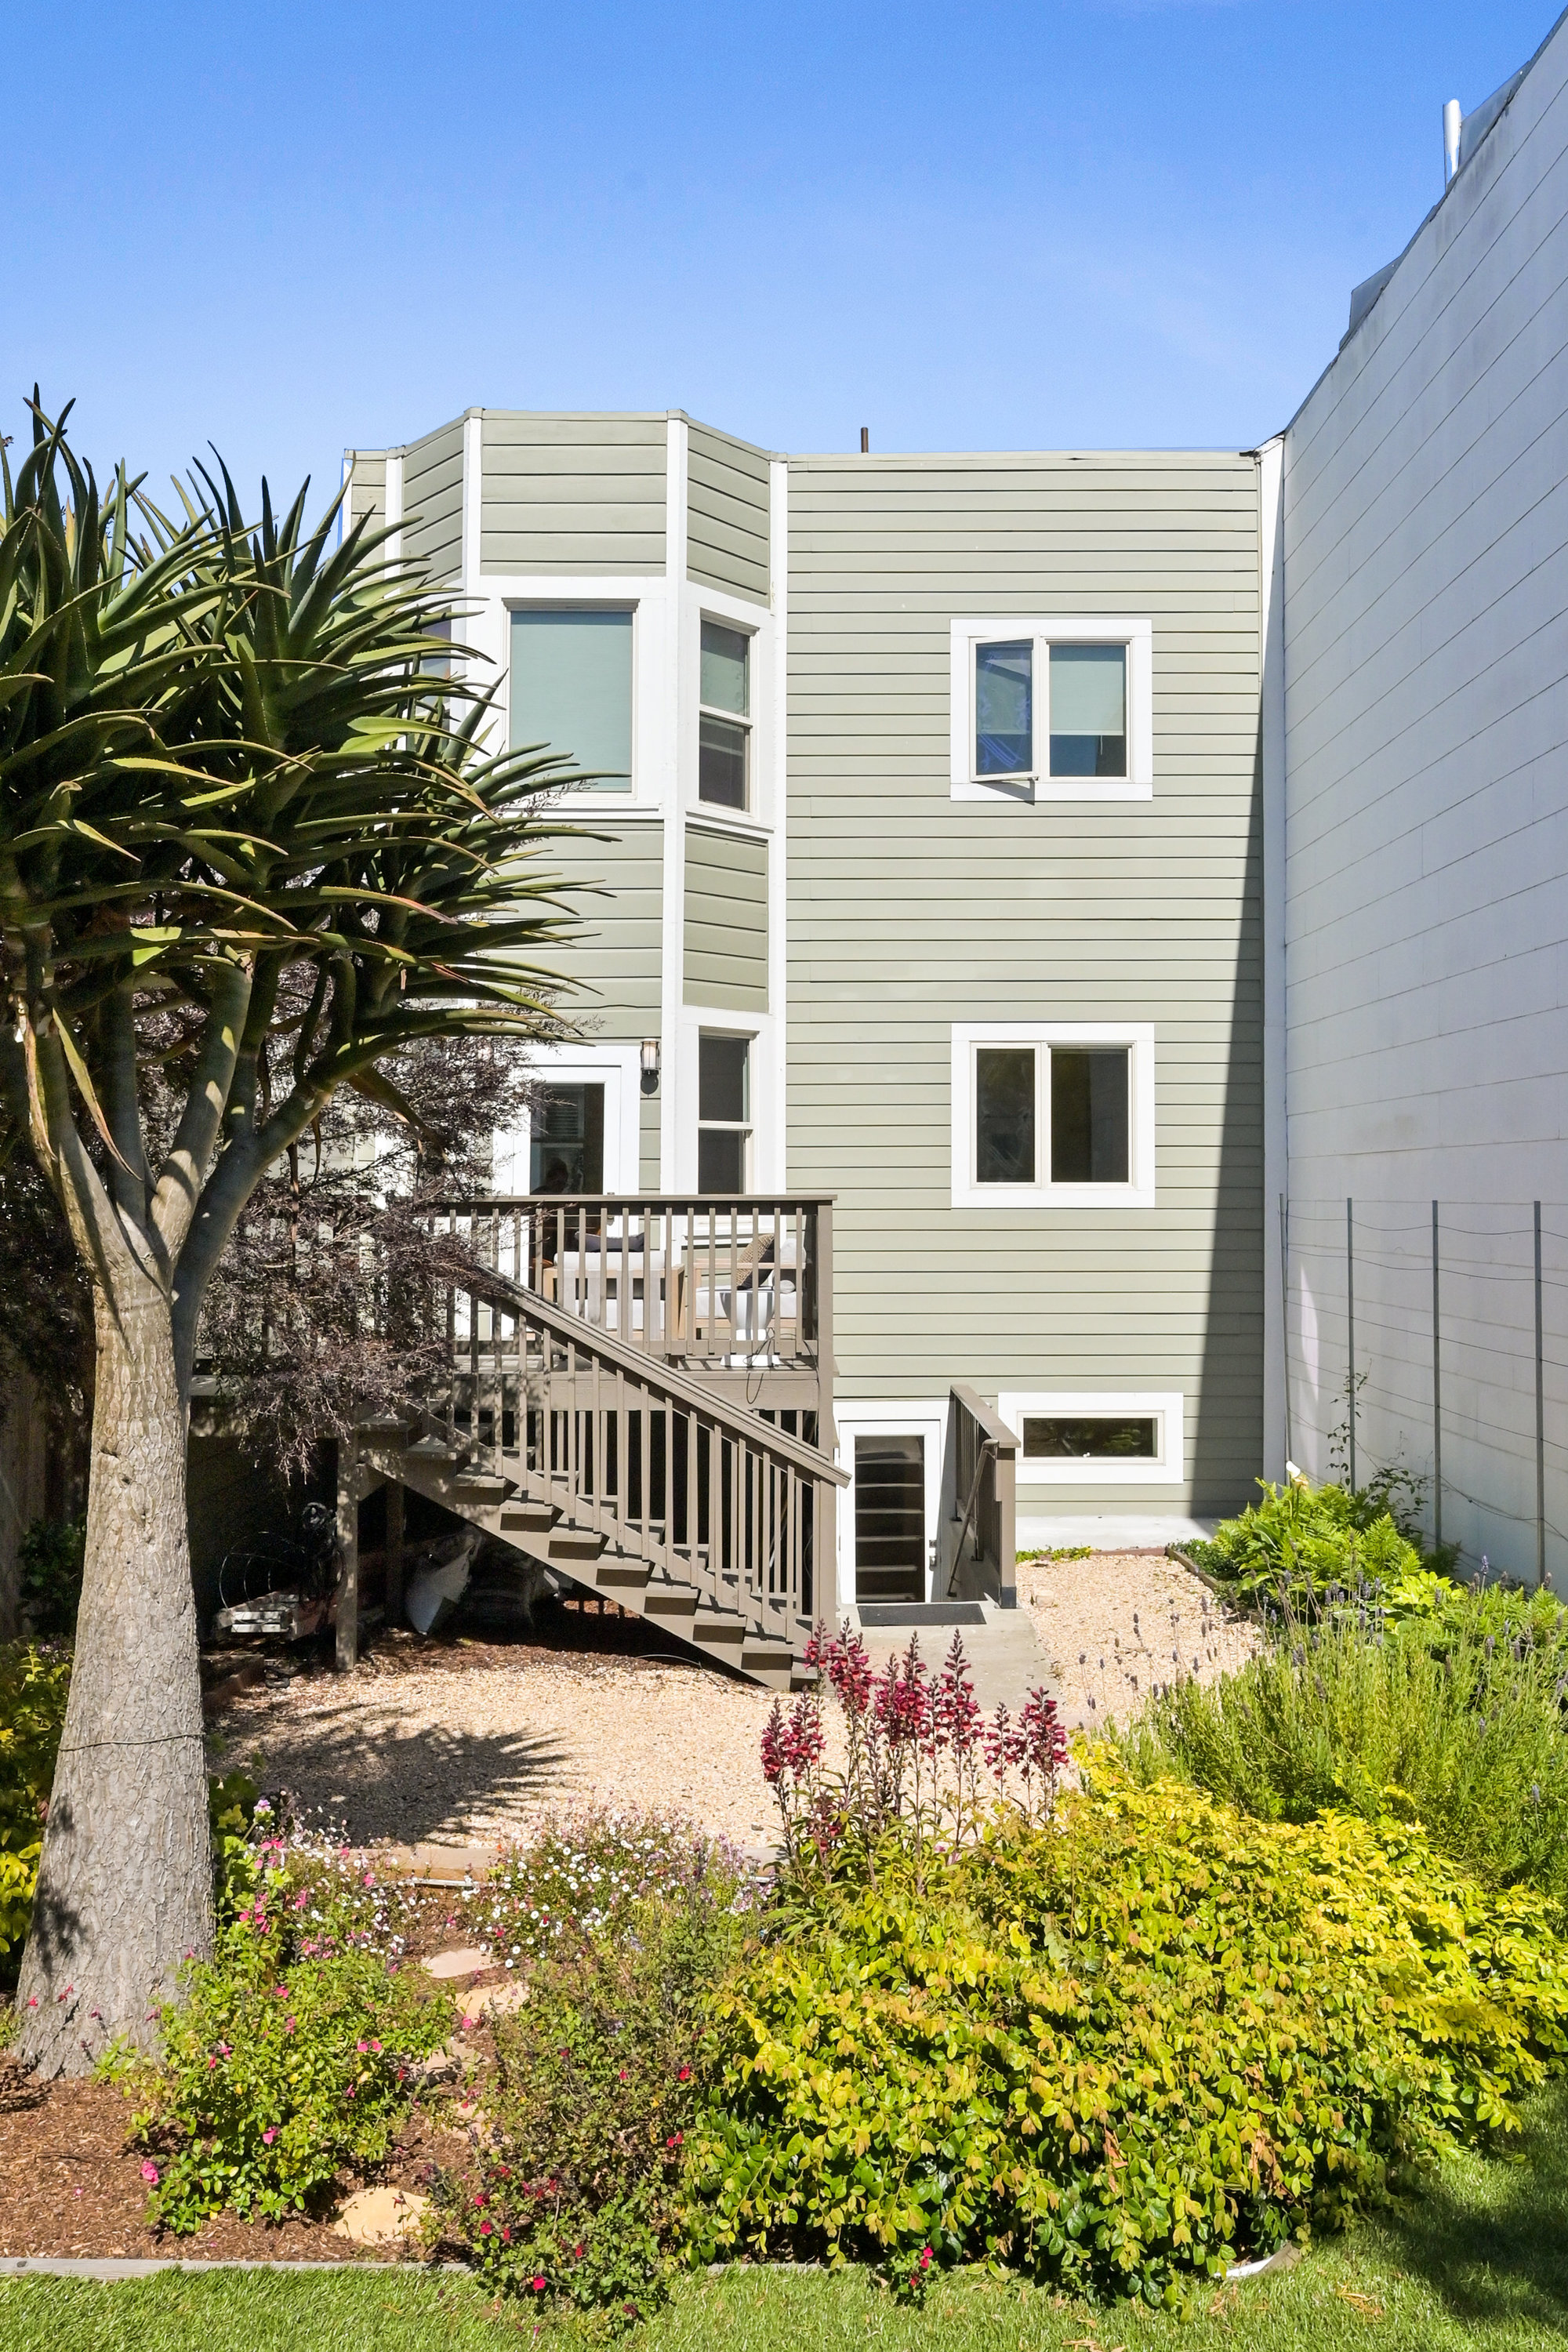 Property Photo: Rear exterior view of 719 18th Avenue, showing a multi-level home